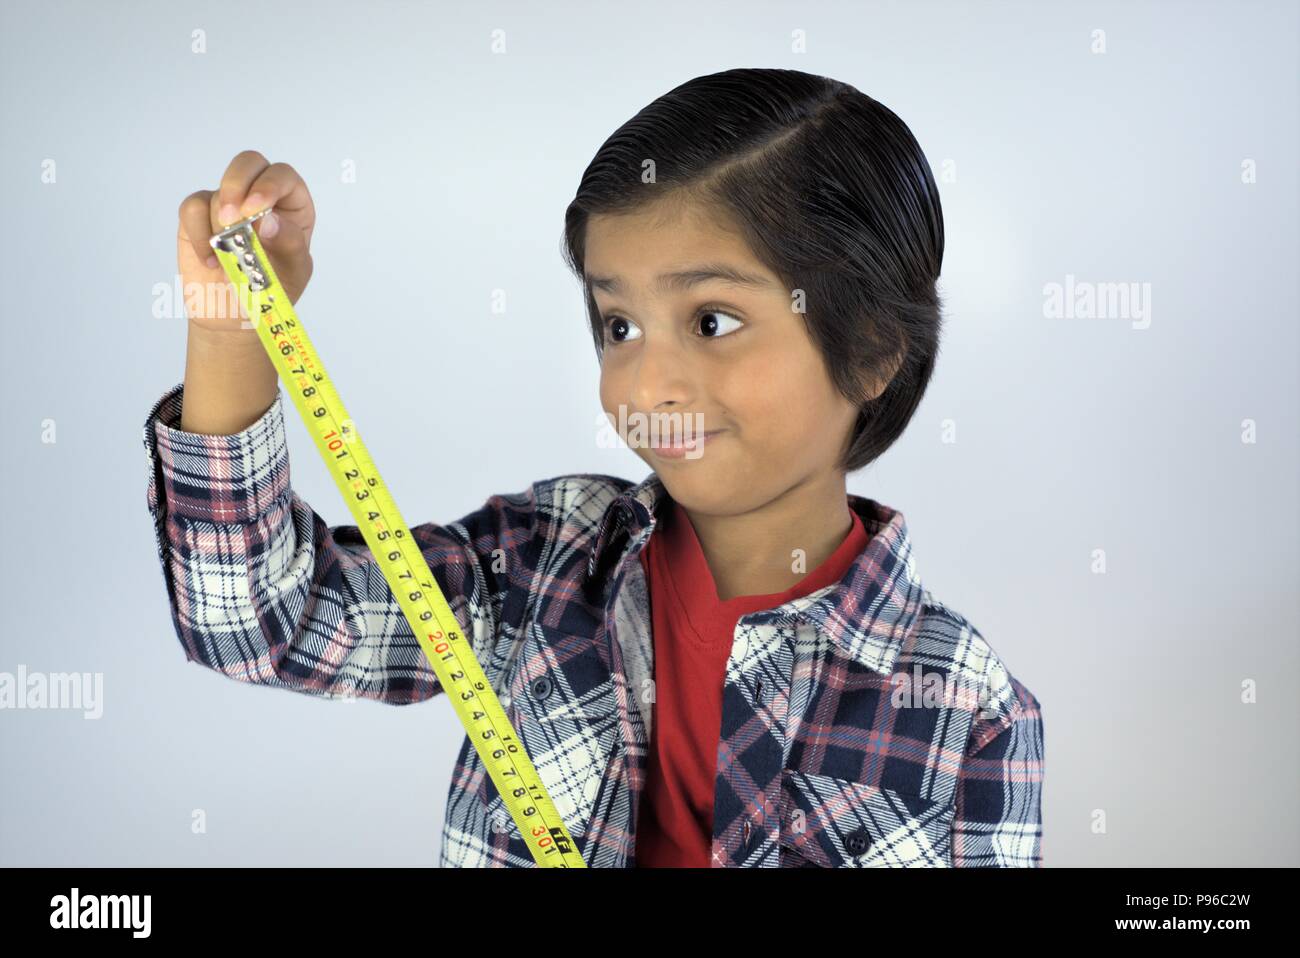 Kid using measuring tape. Smiling kid looking at numbers on tape measure. Concept of measuring height or growing tall. Stock Photo